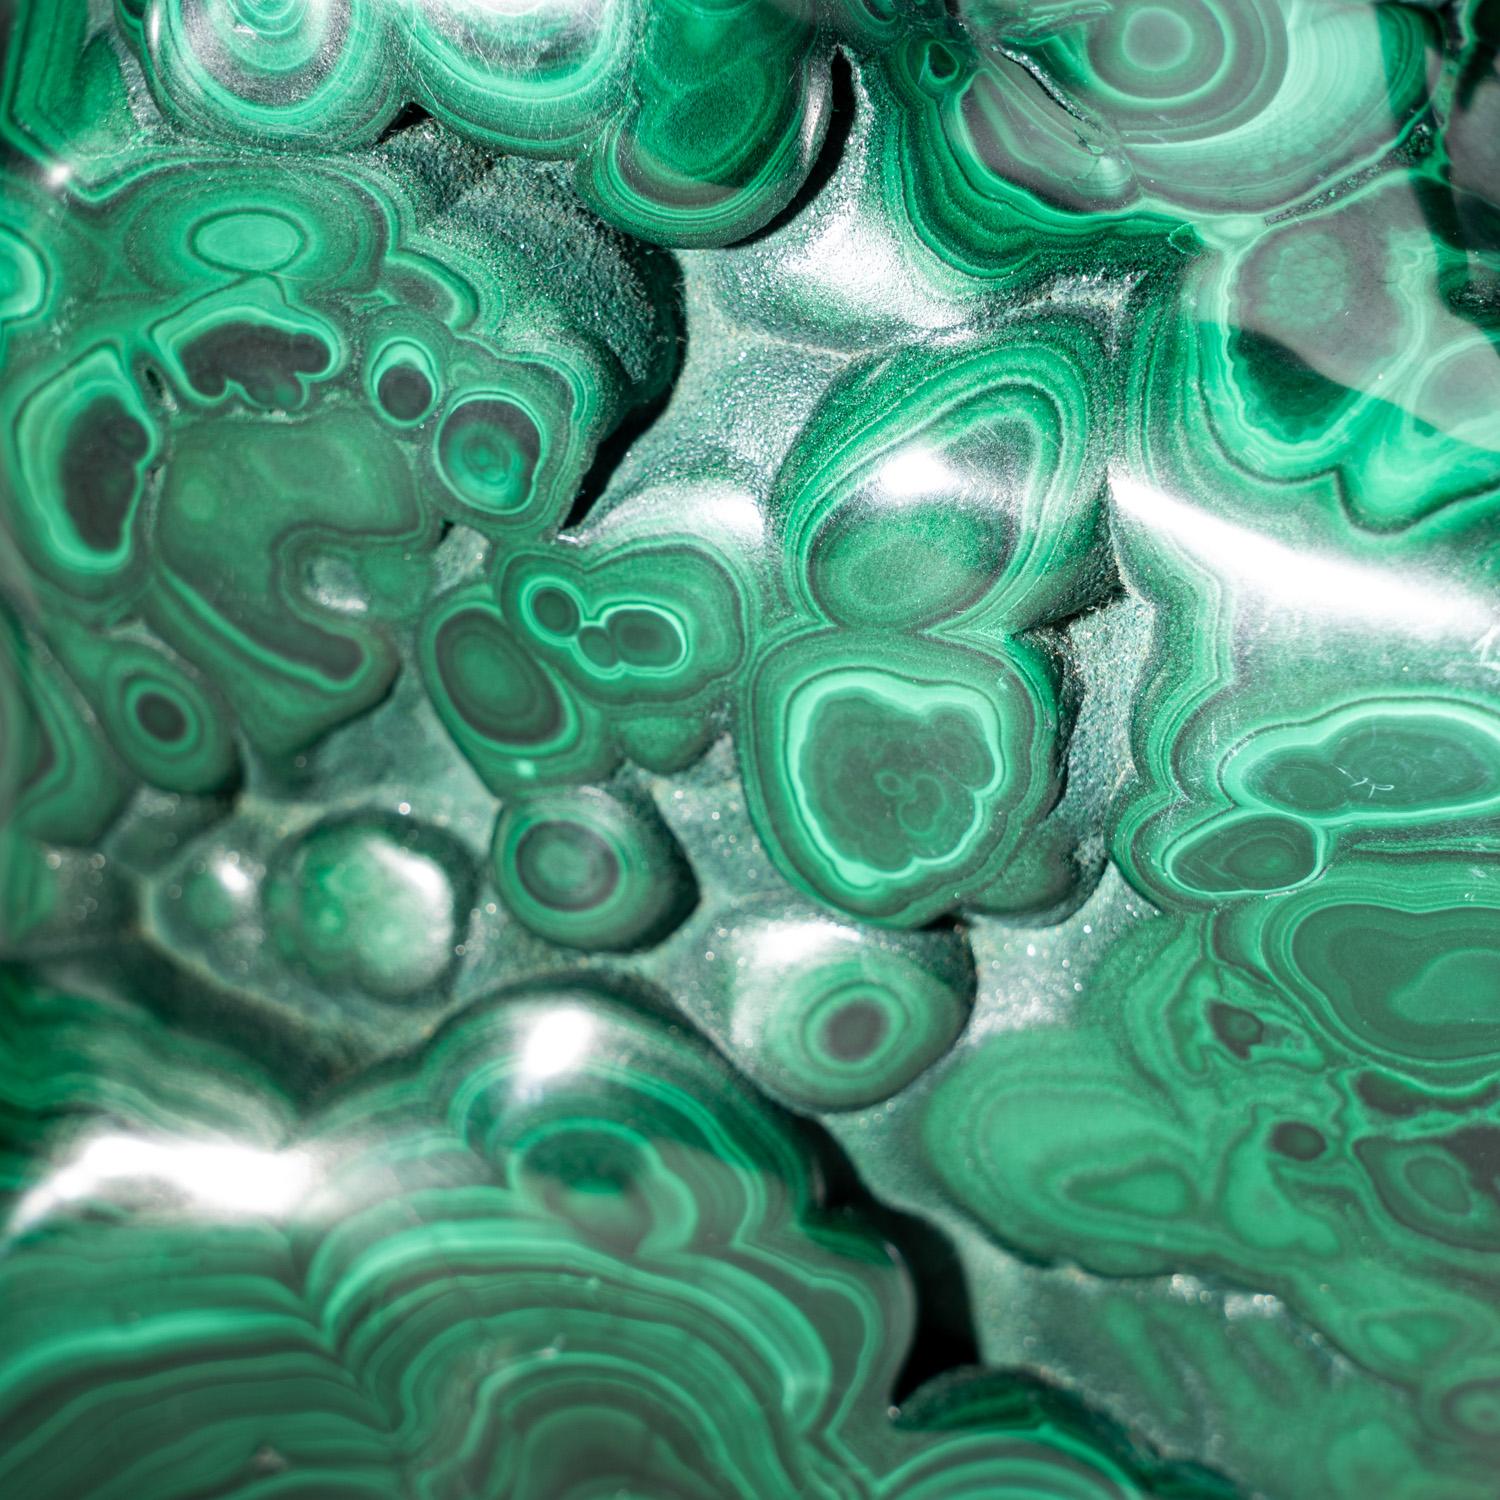 AAA-quality solid freeform of bulls eye Malachite from The Democratic Republic of Congo. This specimen has well defined banded concentric patterns. The piece is made of solid material with no fill whatsoever and is polished to a high-yield mirror